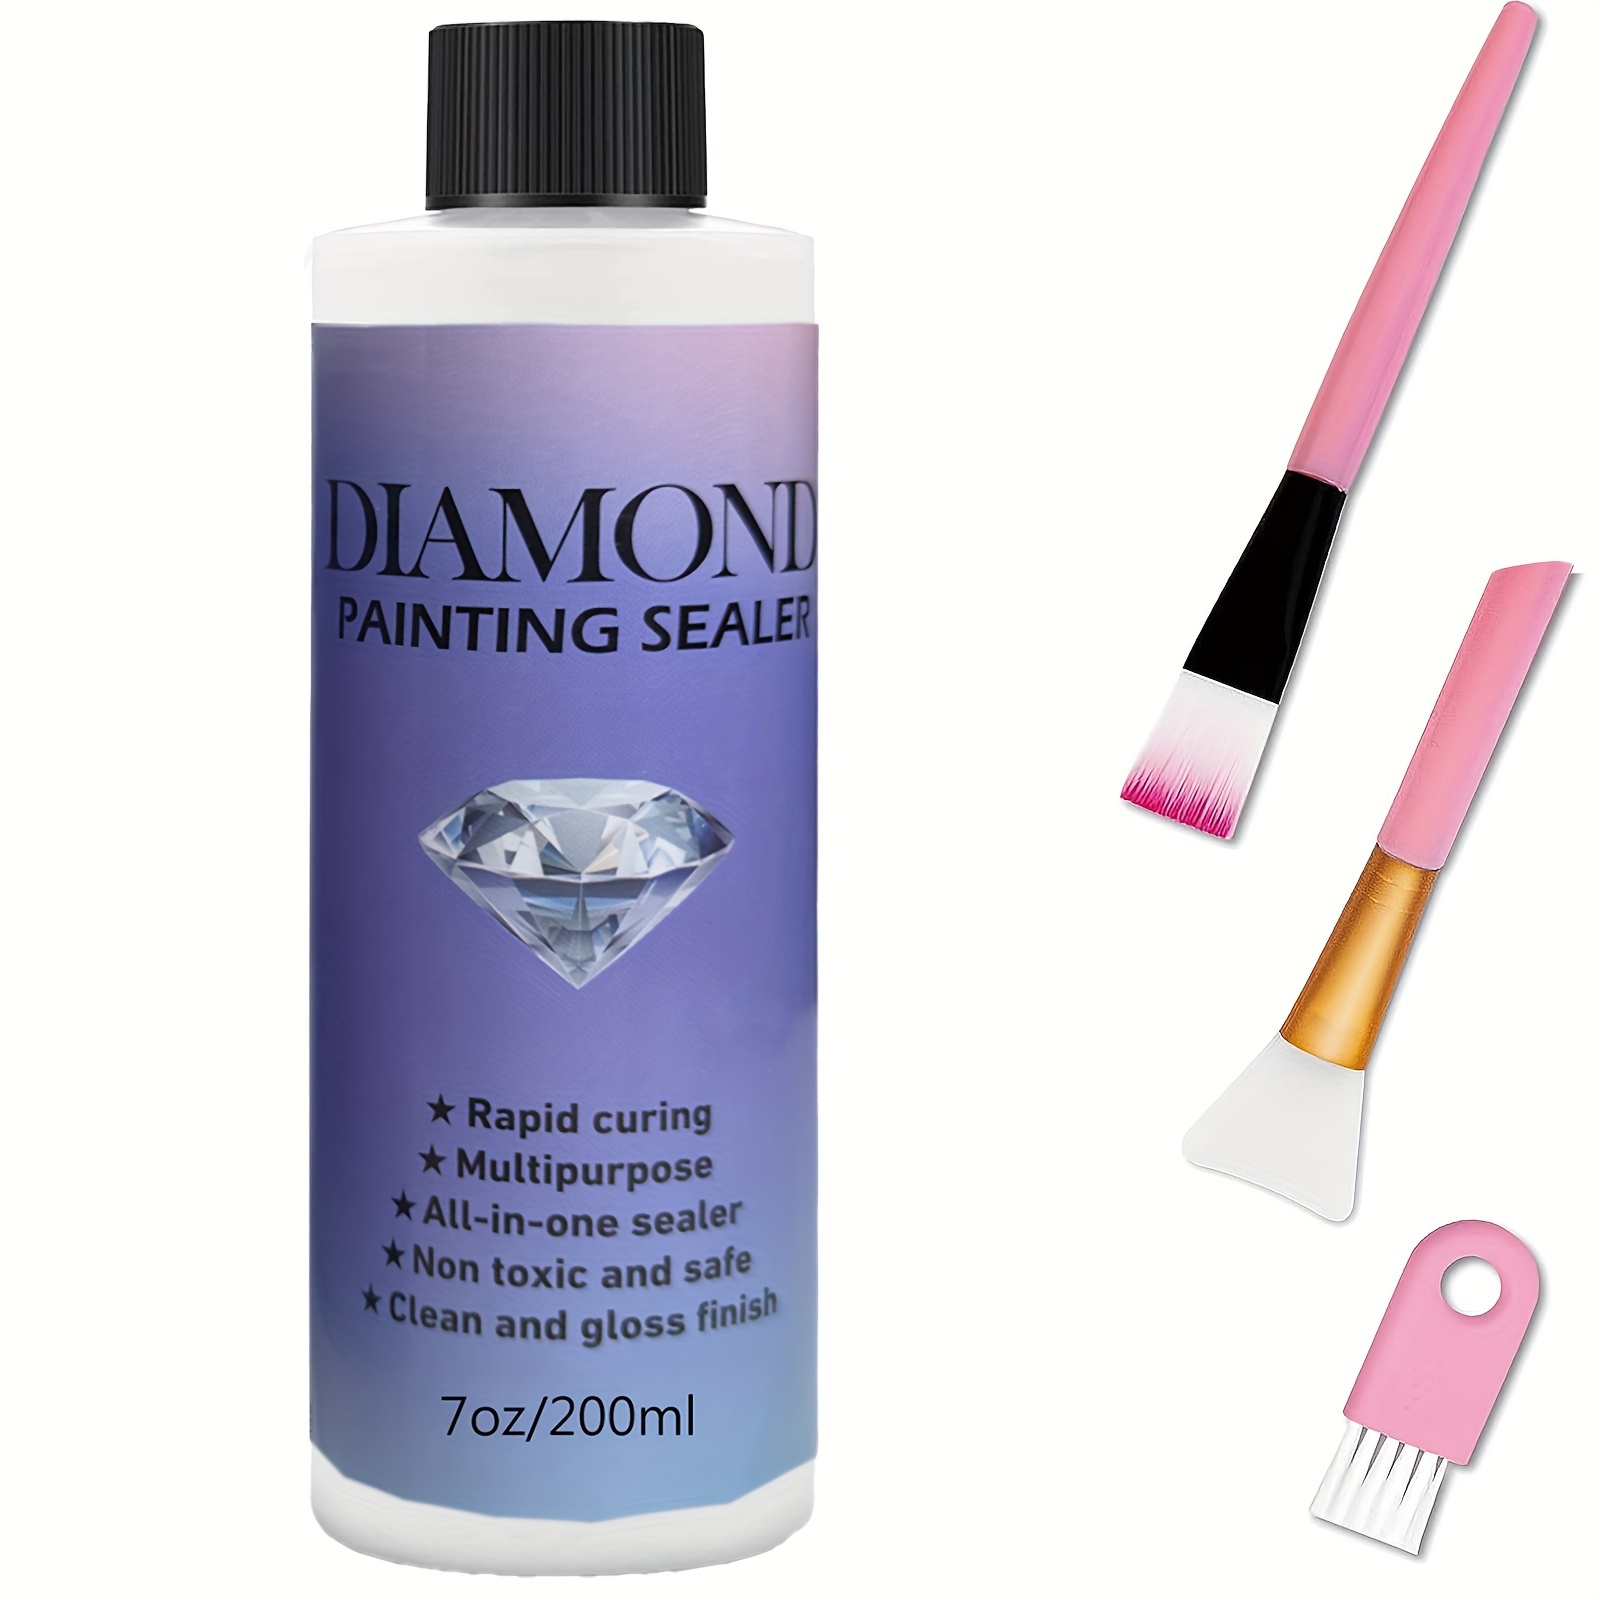  Diamond Painting Sealer, 4 OZ 120ML Permanent Hold &  Transparent Sealer for Diamond Painting and Puzzle Glue, DIY Fixing & Sealing  Painting Accessories : Arts, Crafts & Sewing